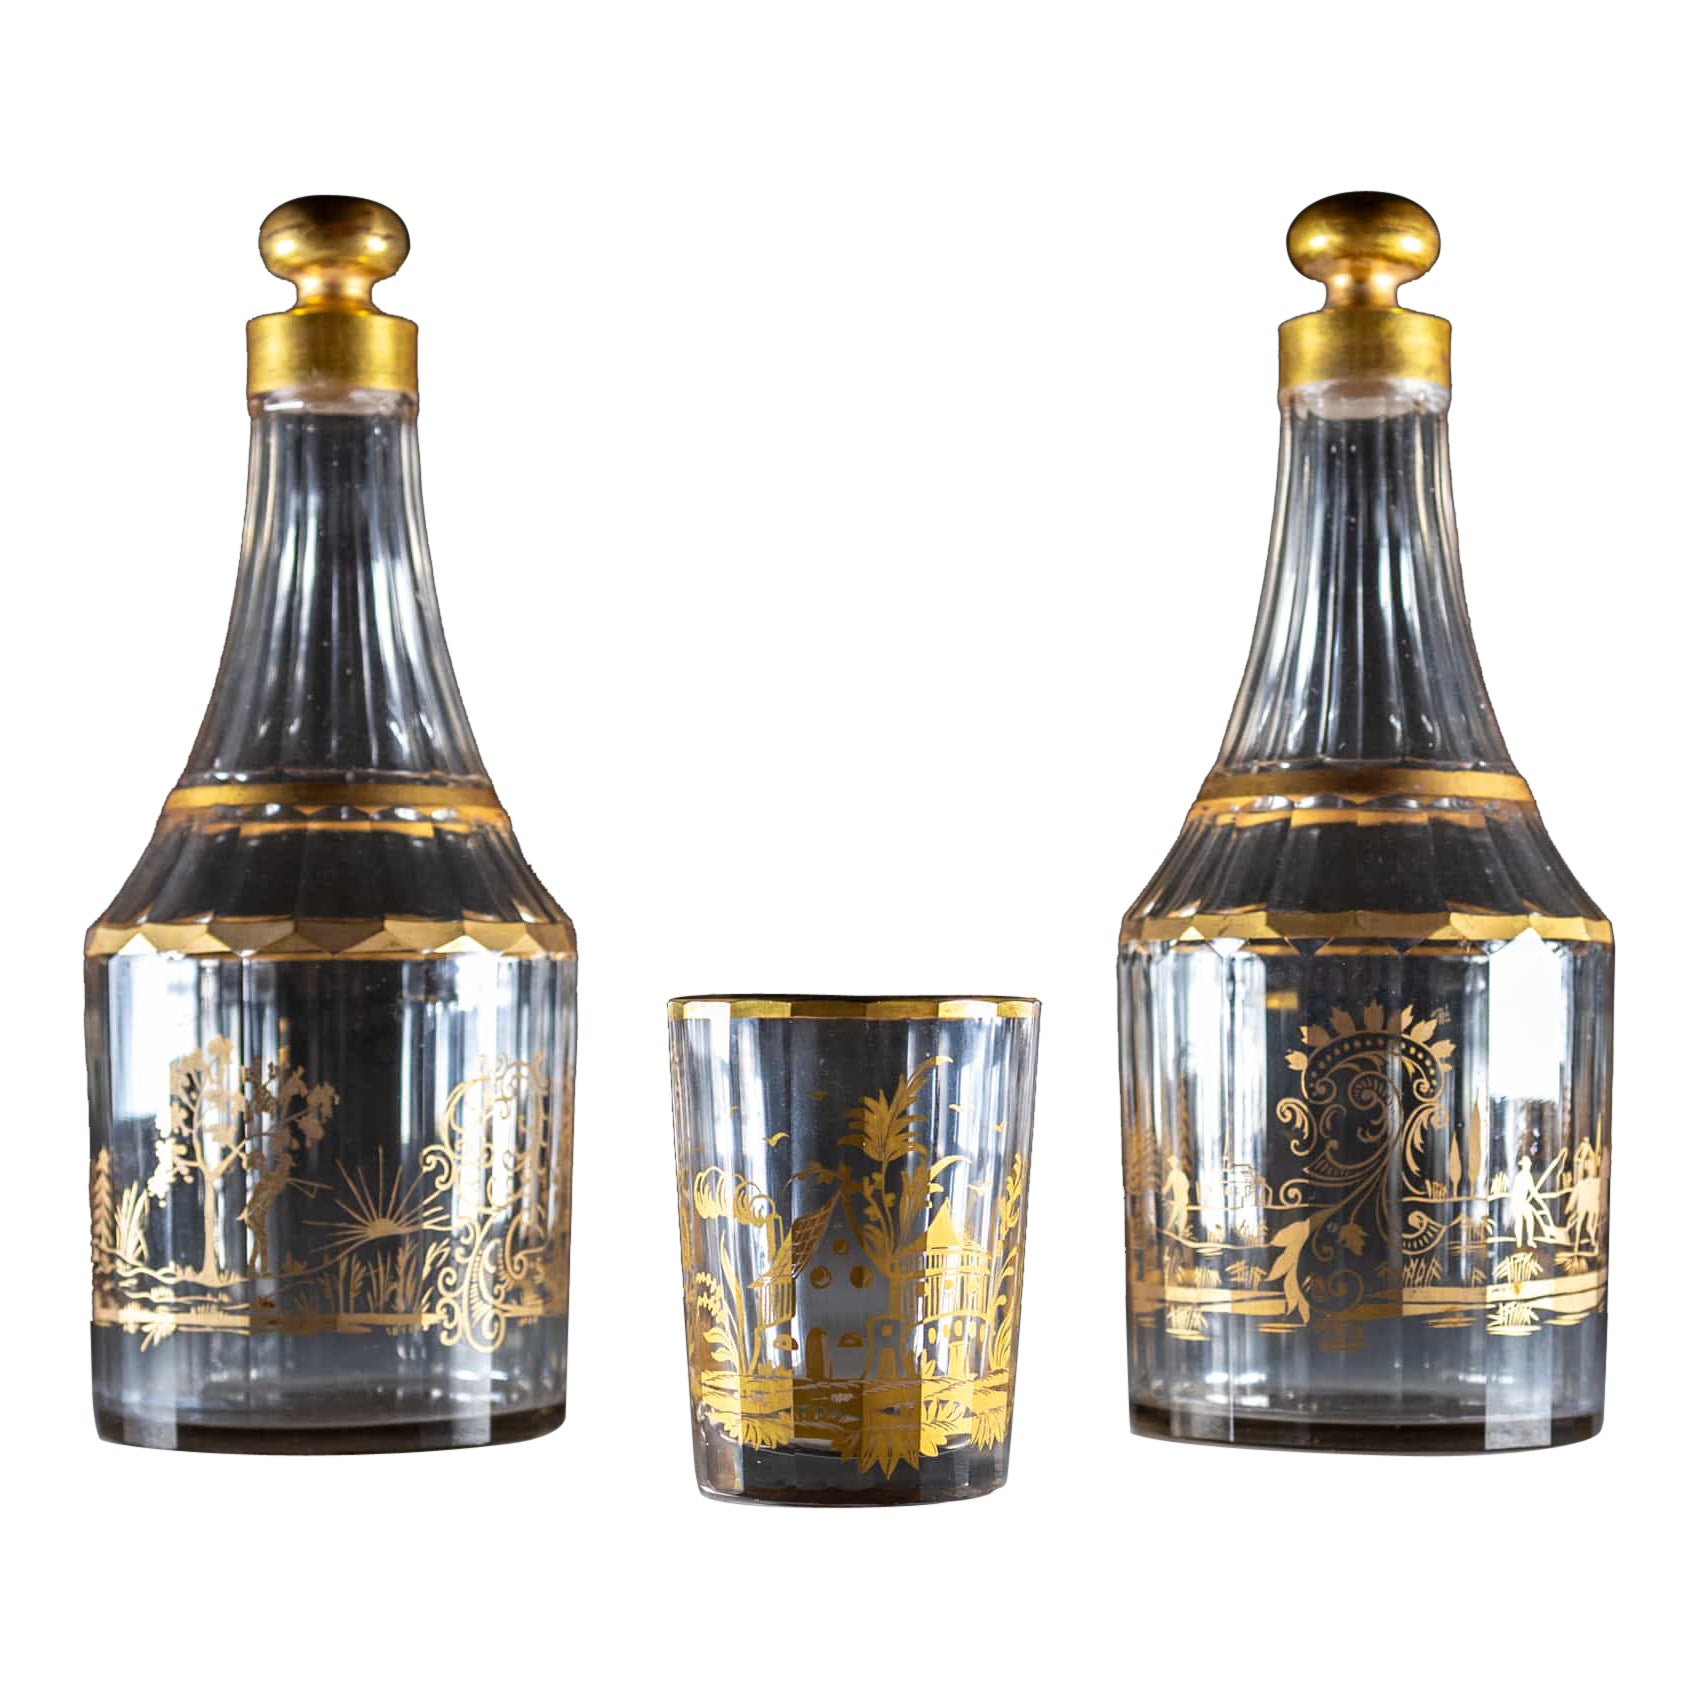 Pair of Bohemian Carafes with Drinking Glass, 19th Century